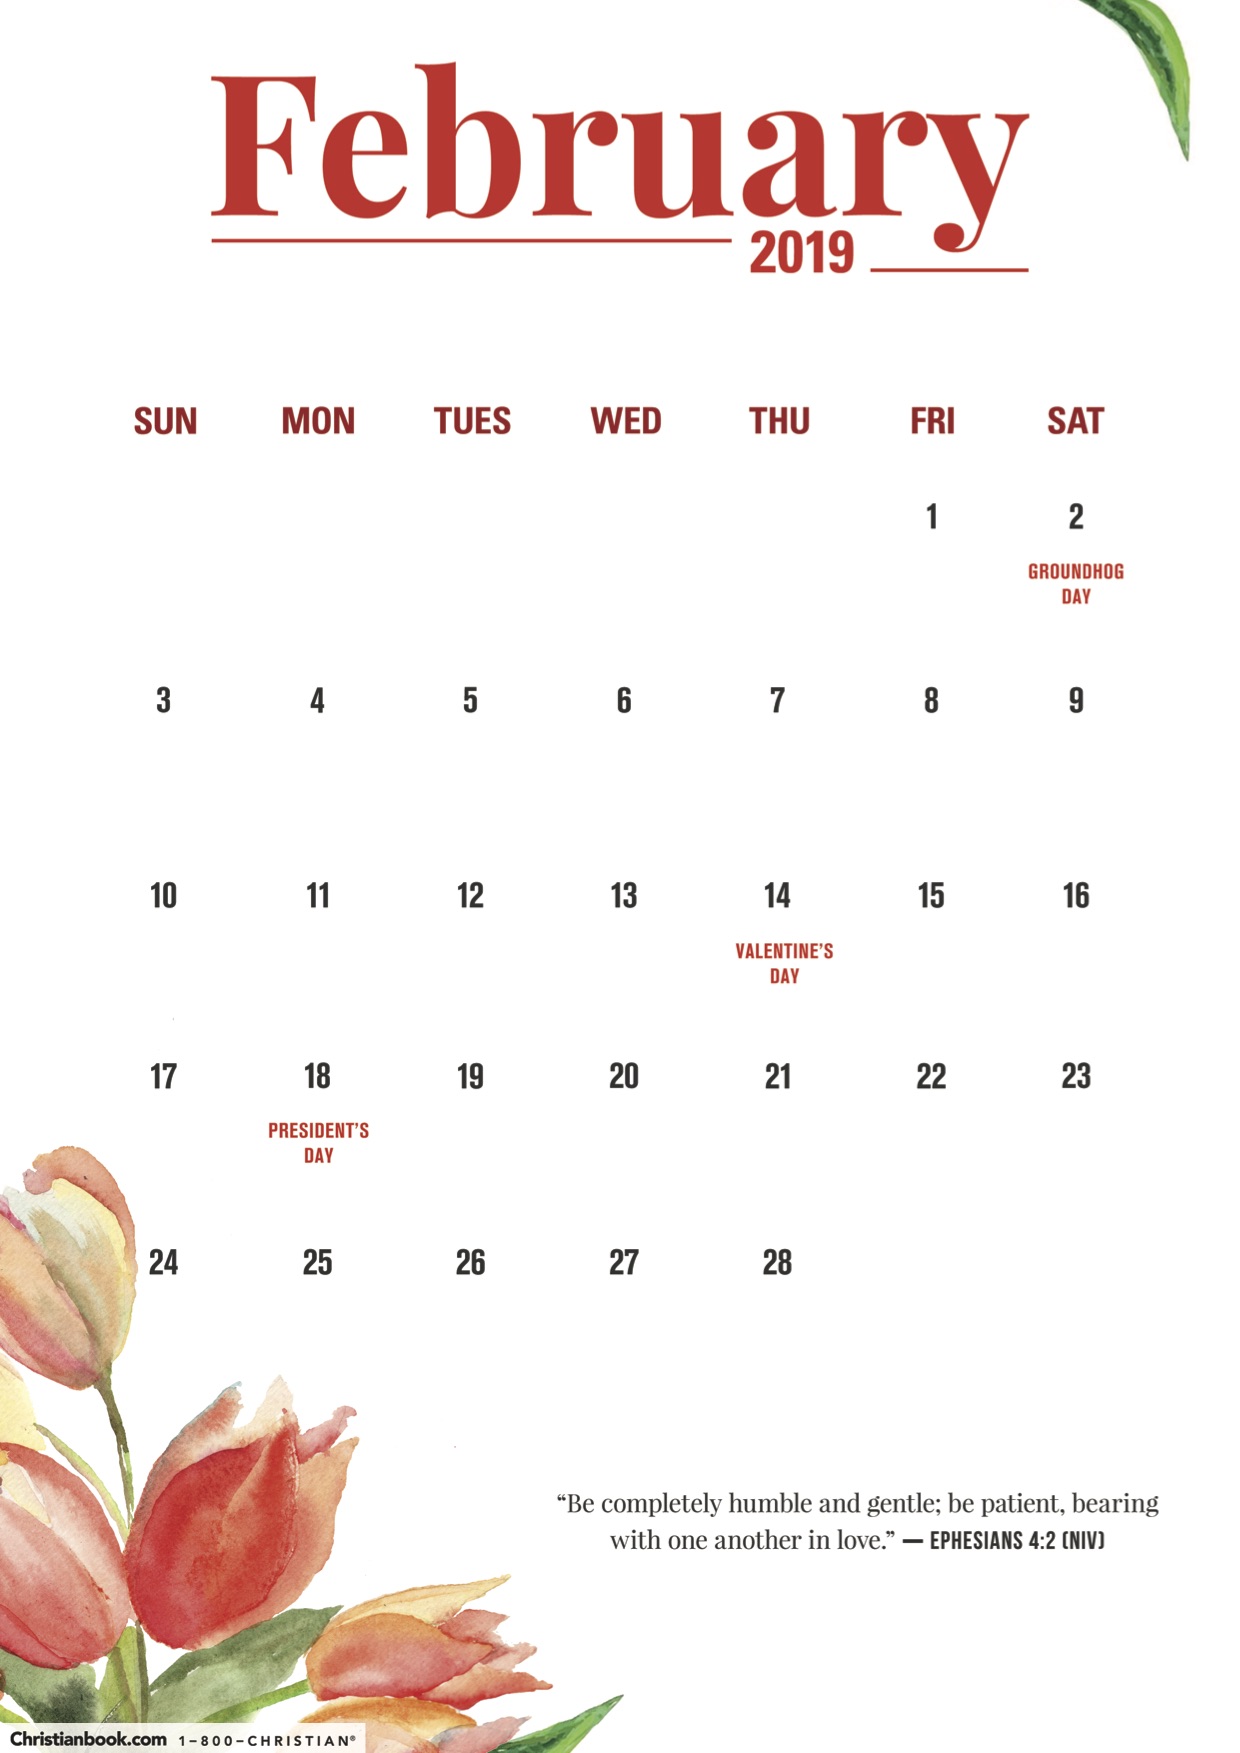 february-2019-calendar-templates-for-word-excel-and-pdf